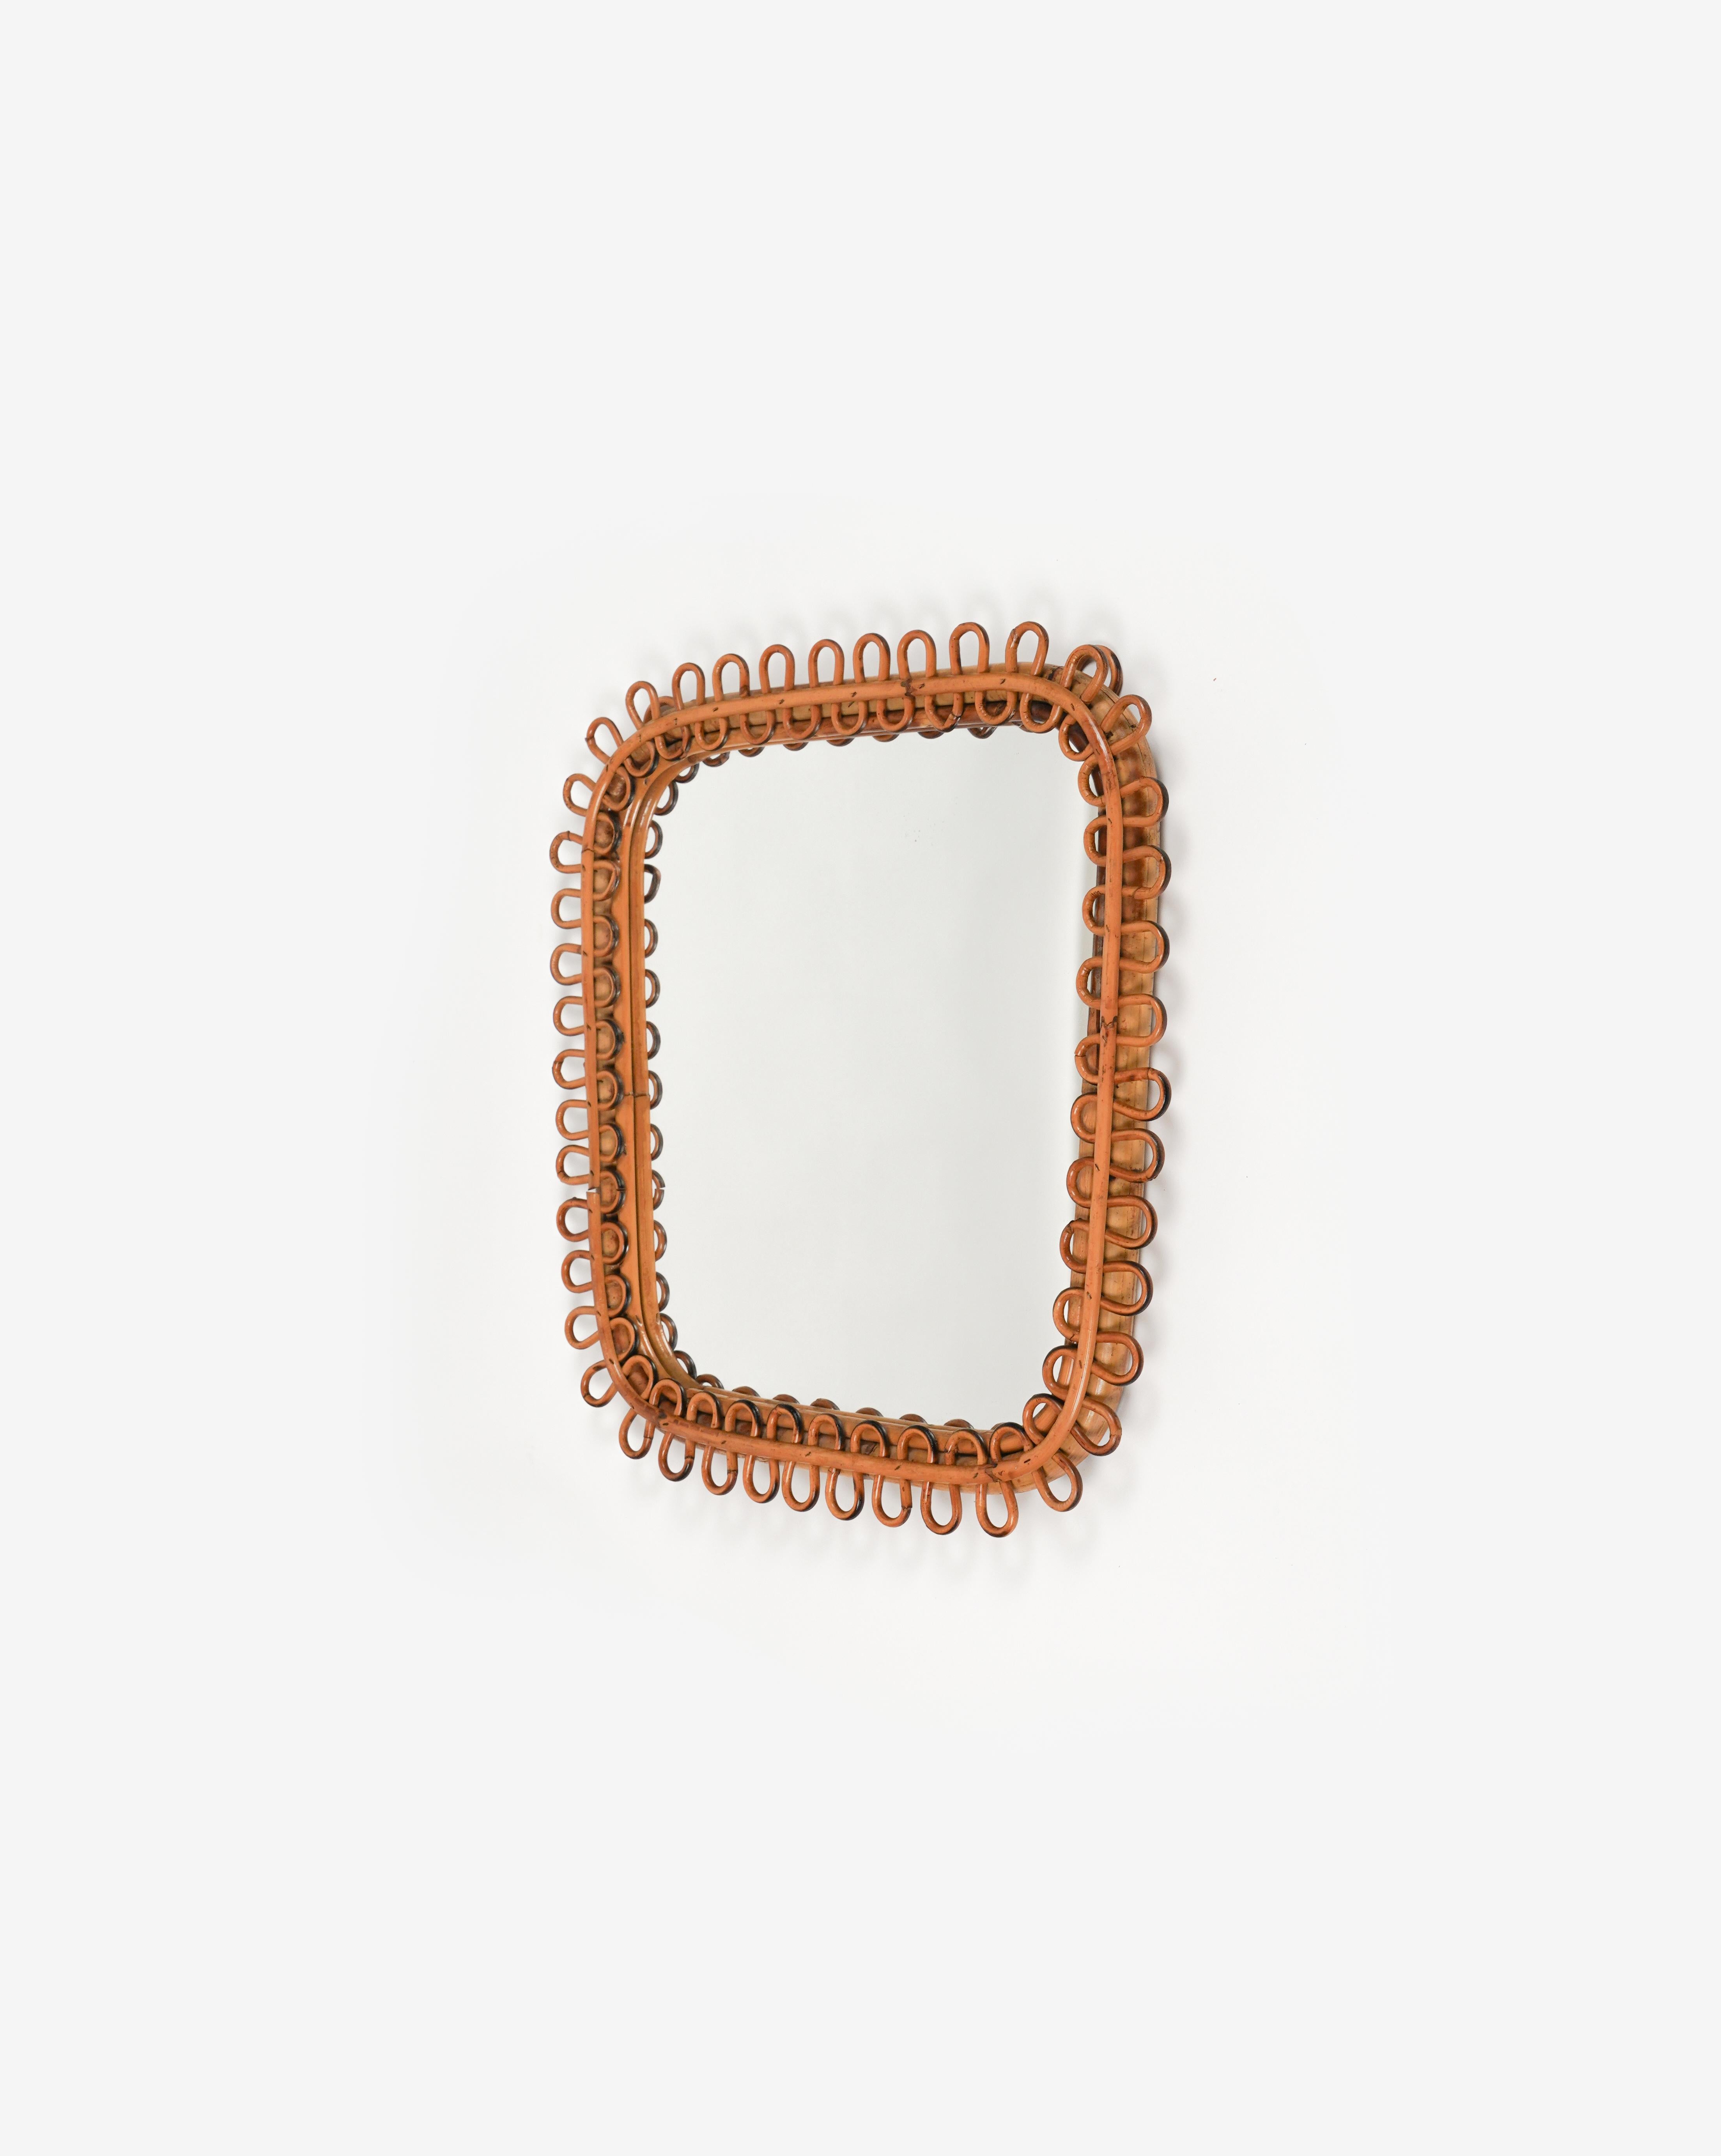 Midcentury Rattan & Bamboo Square Wall Mirror Franco Albini Style, Italy 1960s For Sale 4